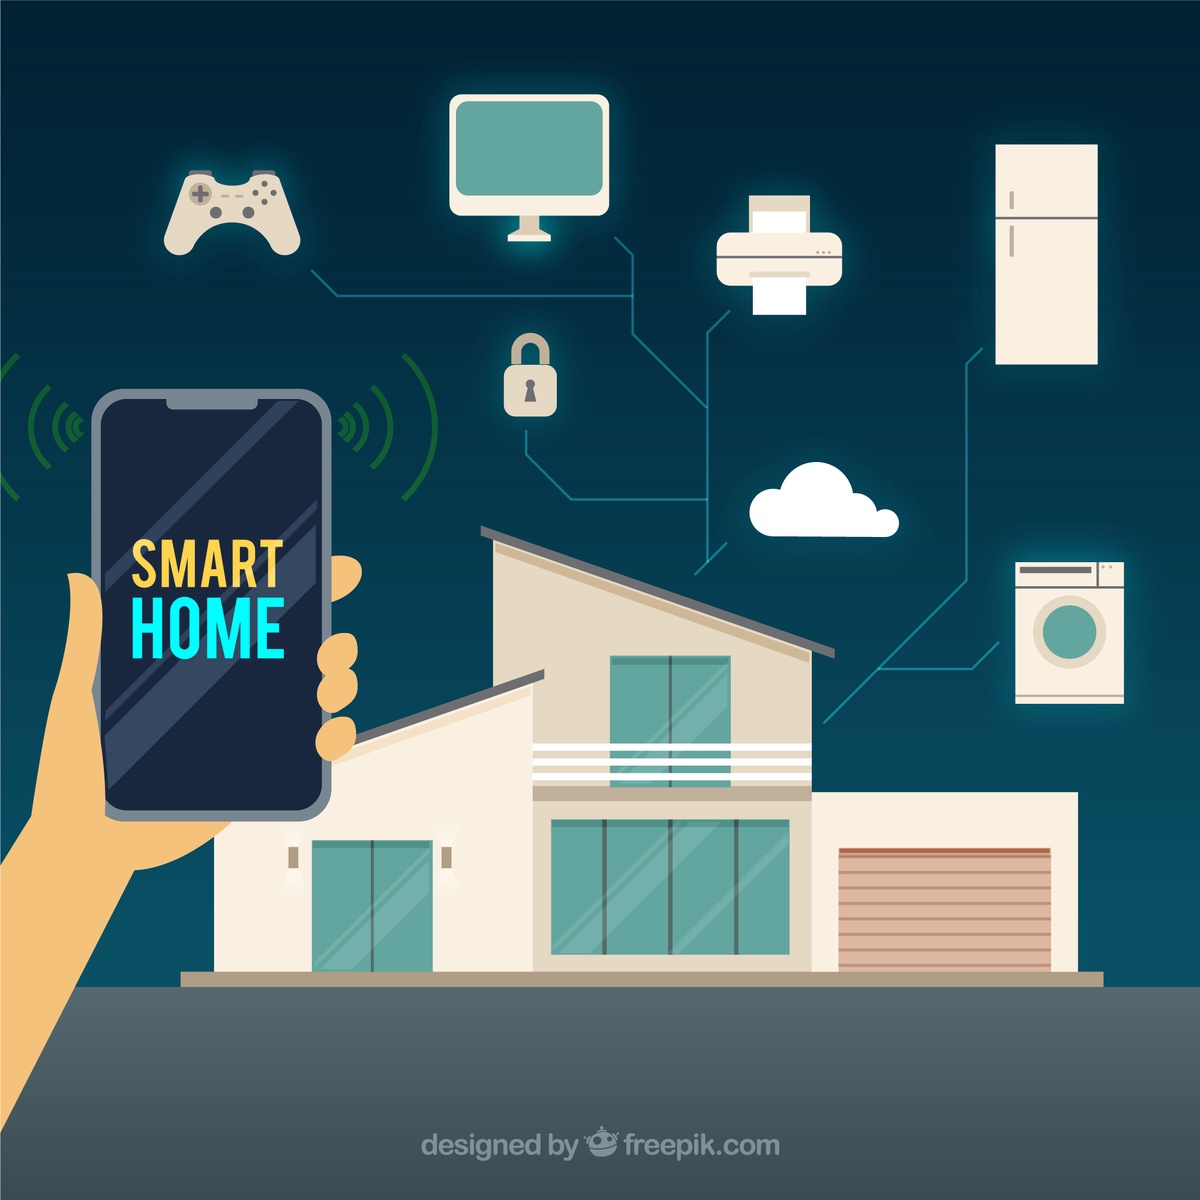 Smart Technologies and Double Glazing: Integration for Smart Homes